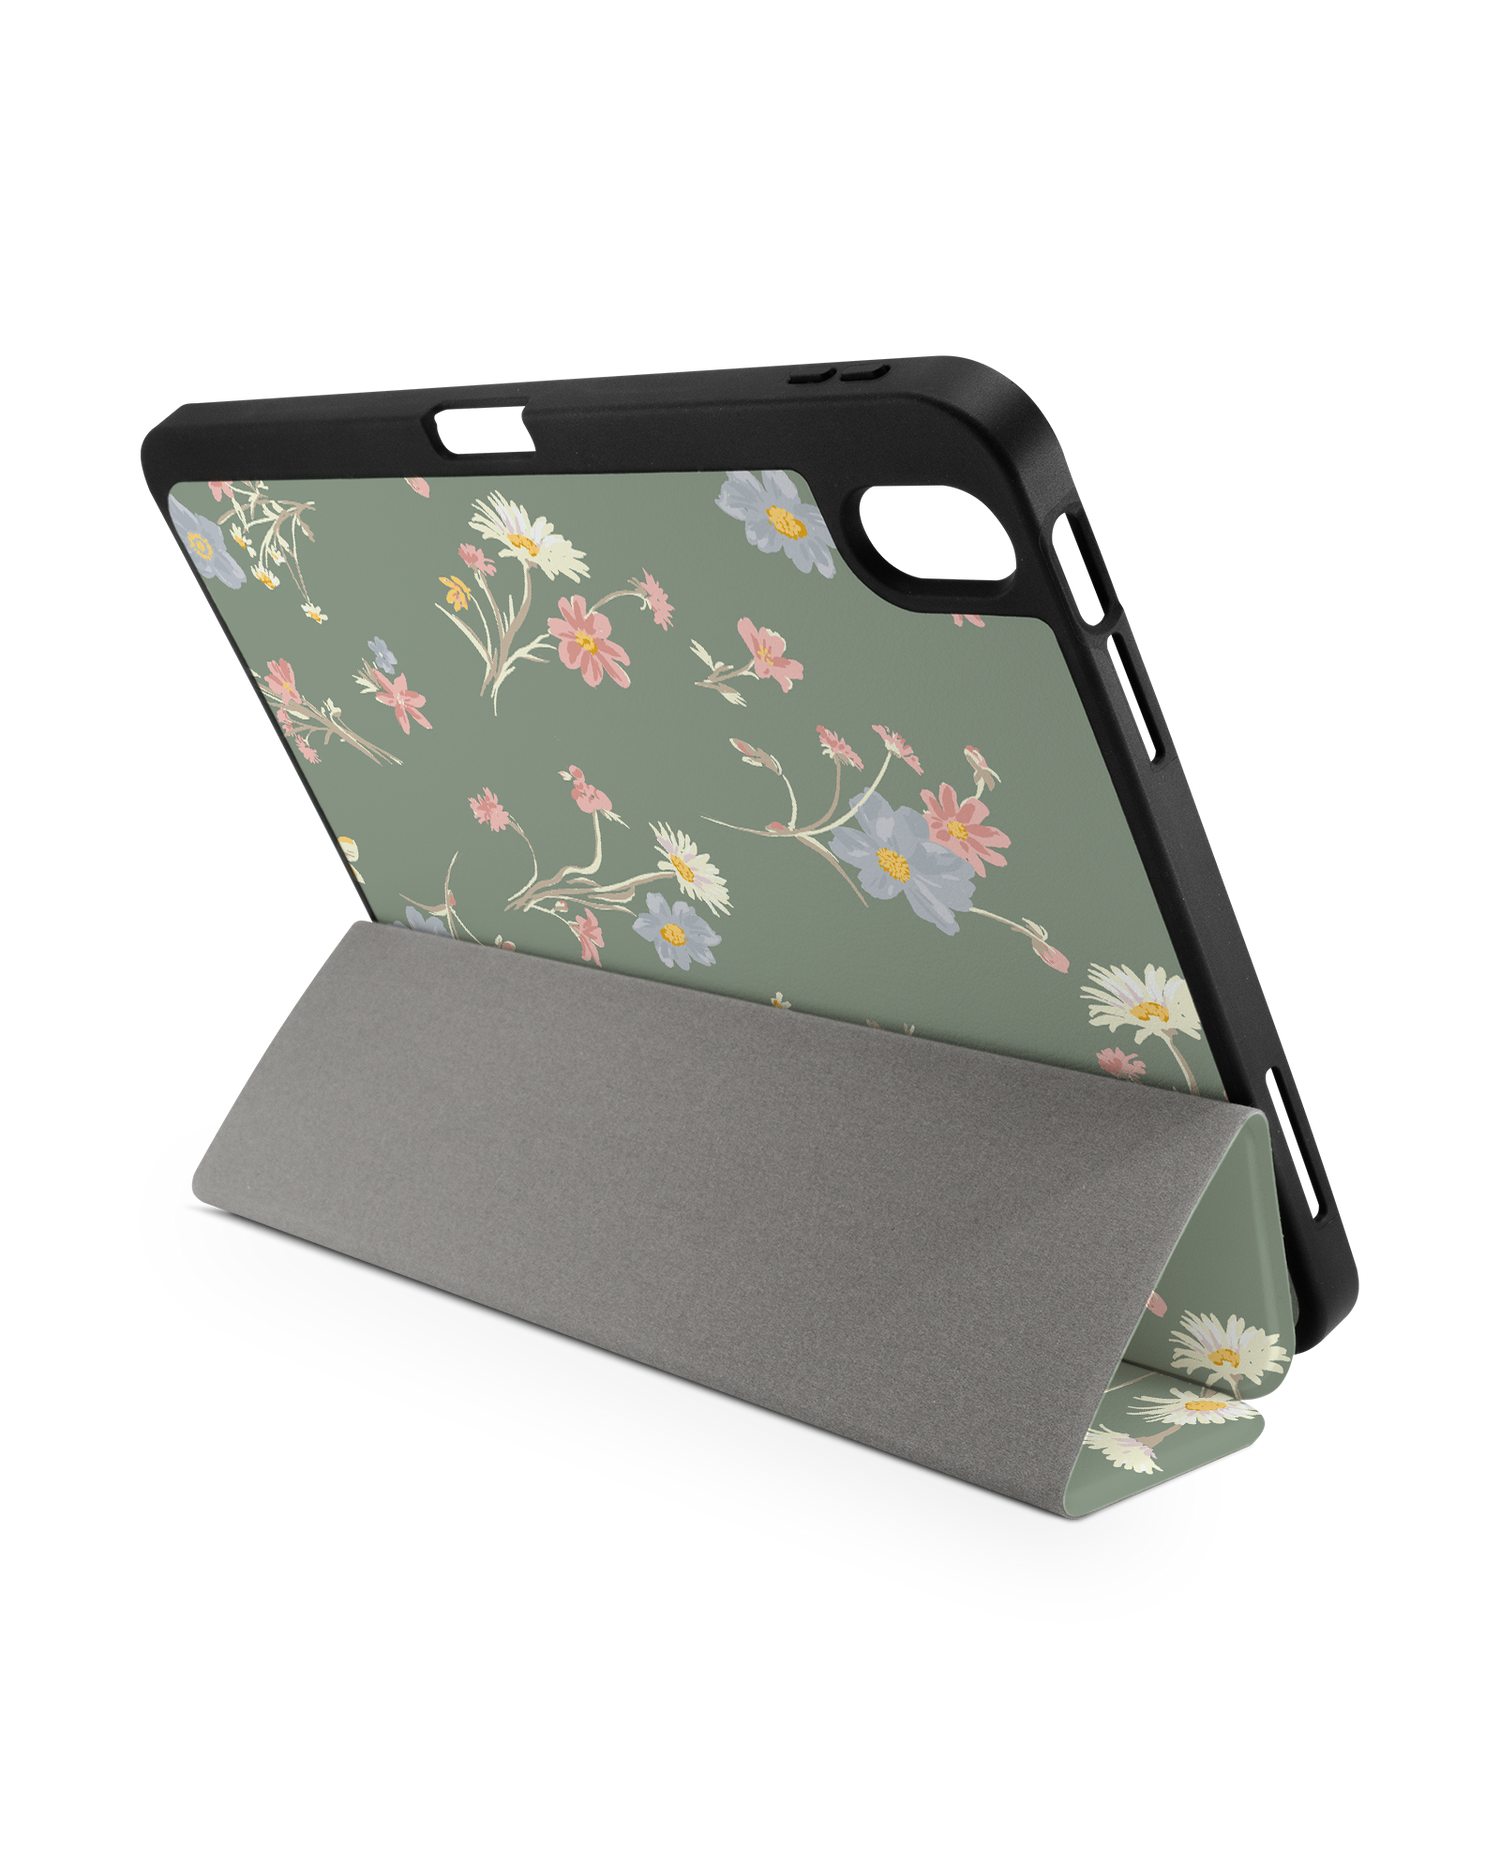 Wild Flower Sprigs iPad Case with Pencil Holder for Apple iPad (10th Generation): Set up in landscape format (back view)